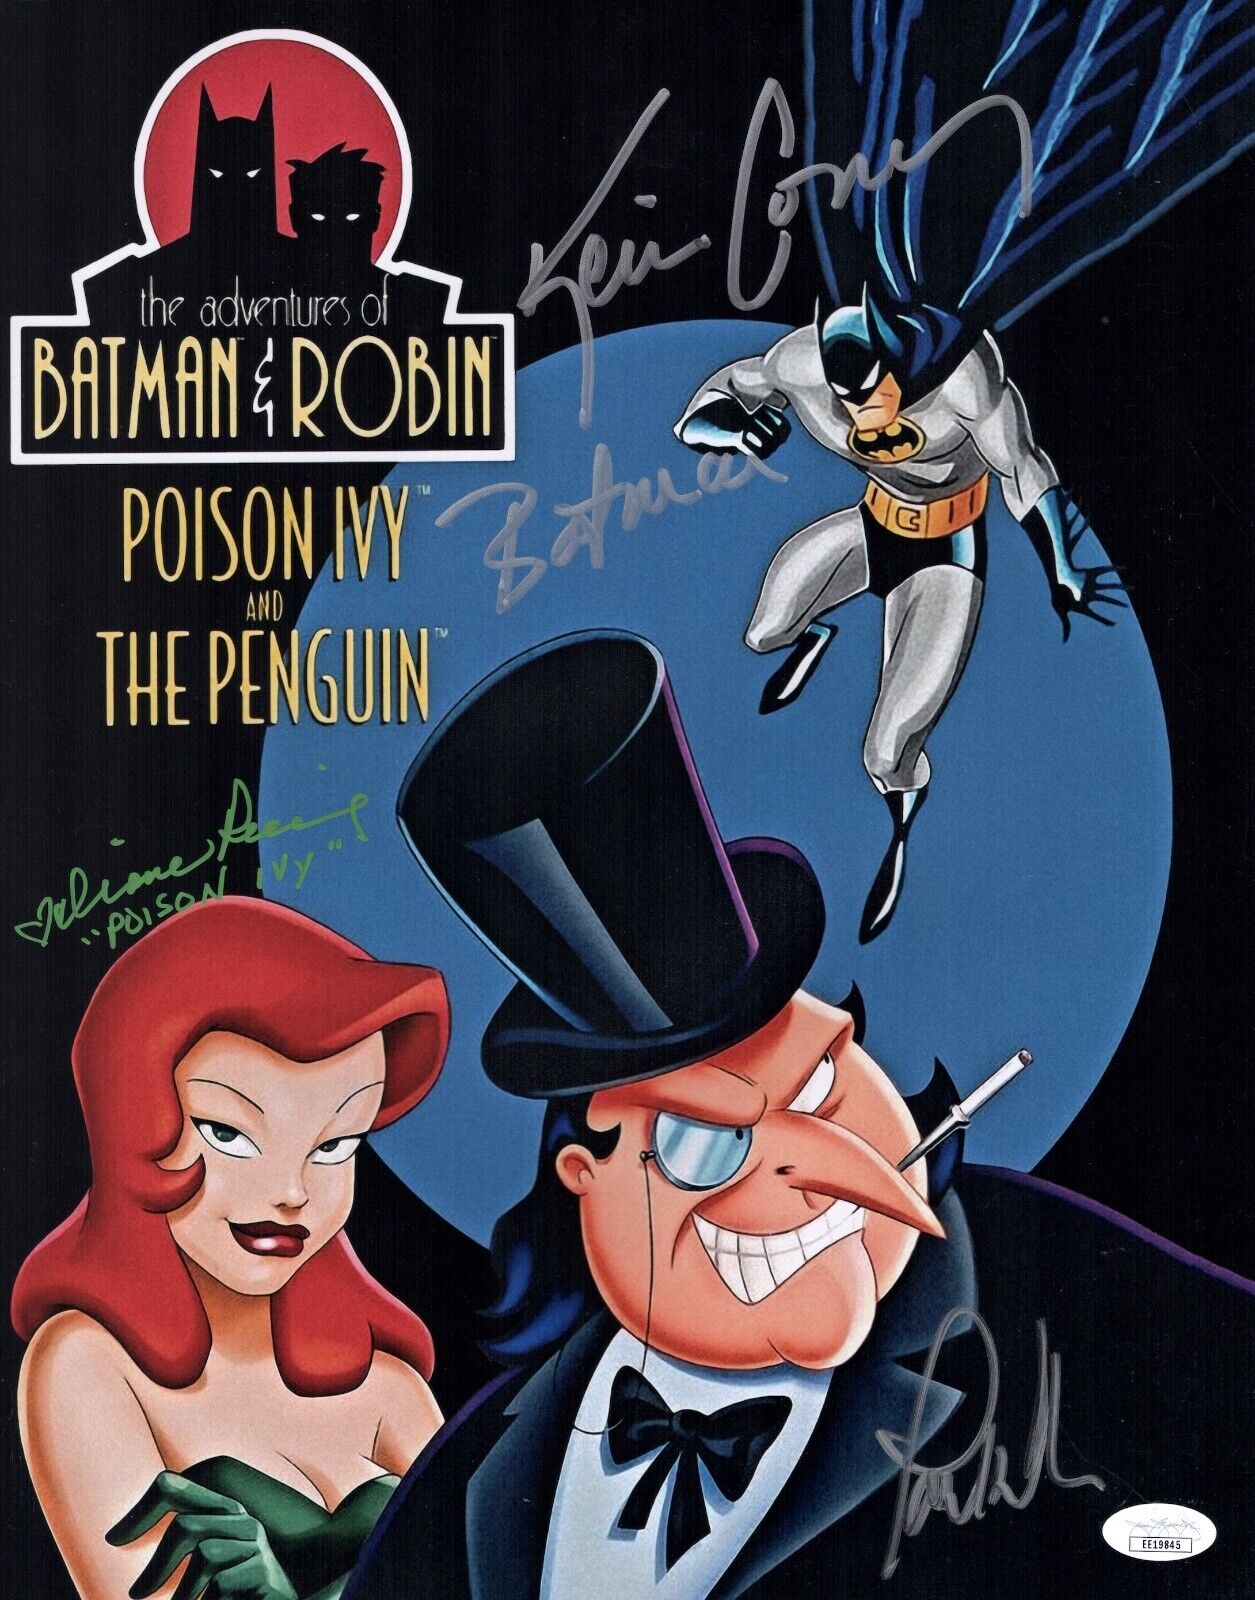 KEVIN CONROY Batman Animated Series Cast X3 Signed 11x14 Photo Poster painting JSA COA